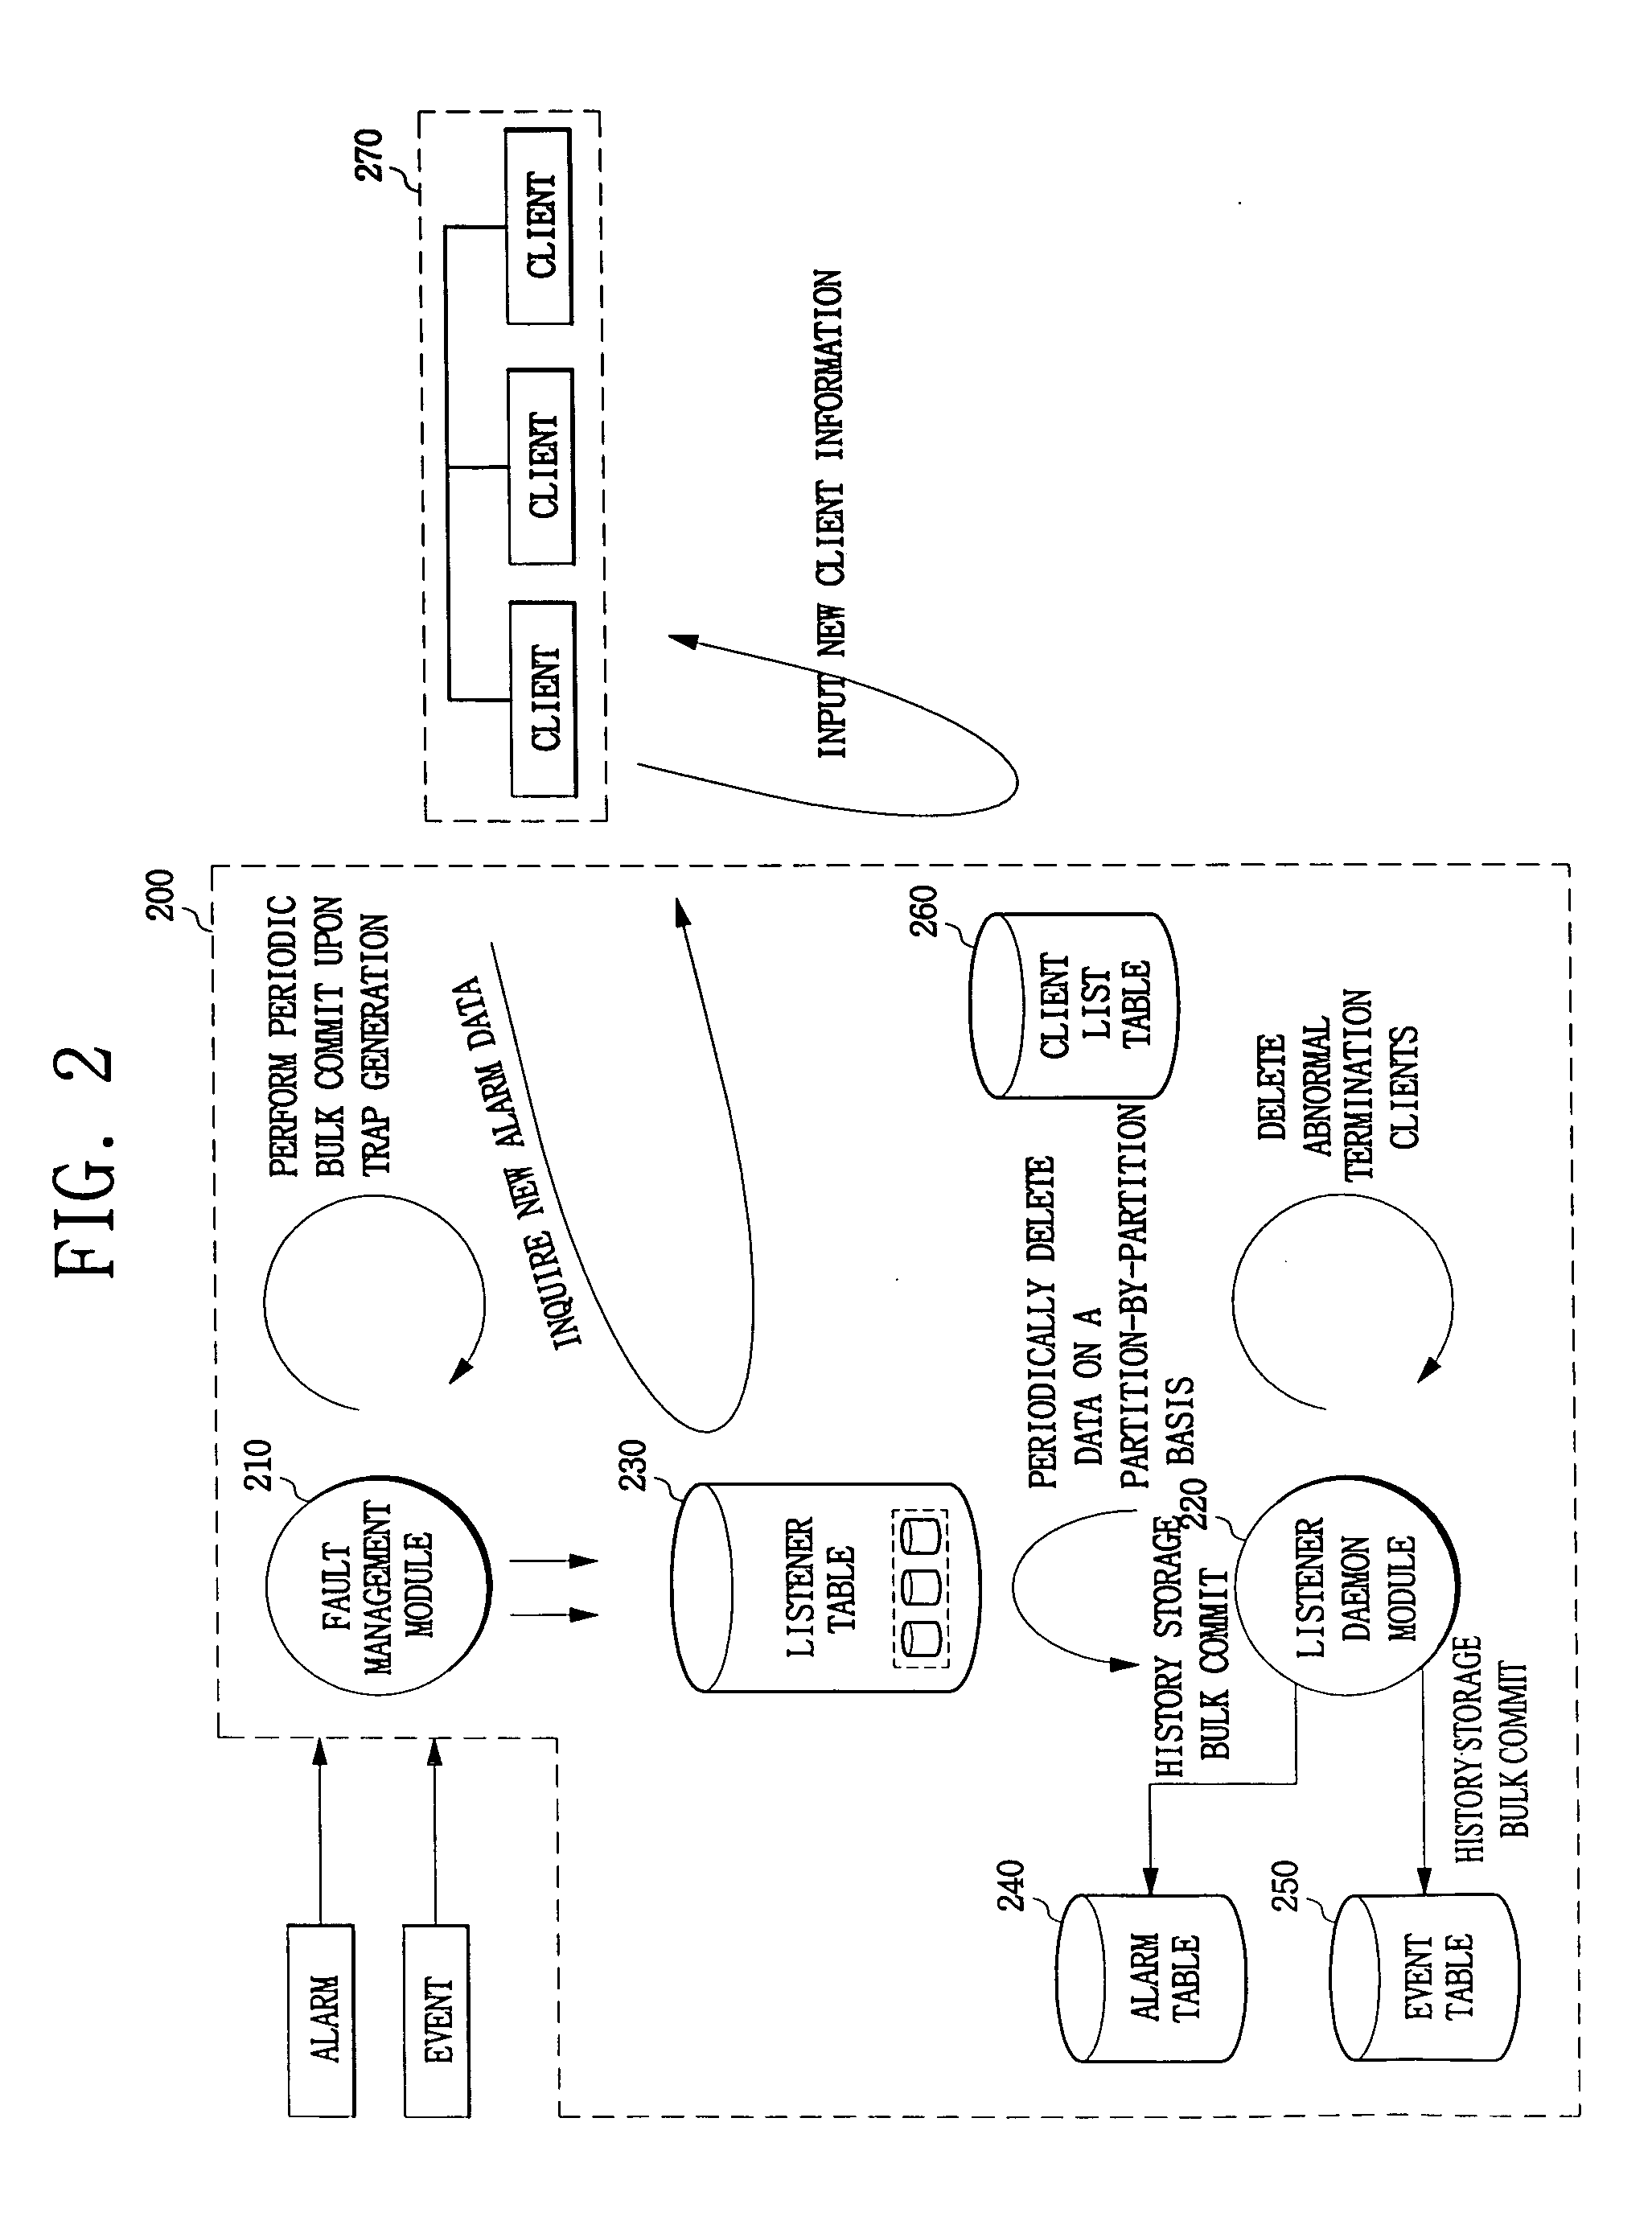 Method and system for processing fault information in NMS